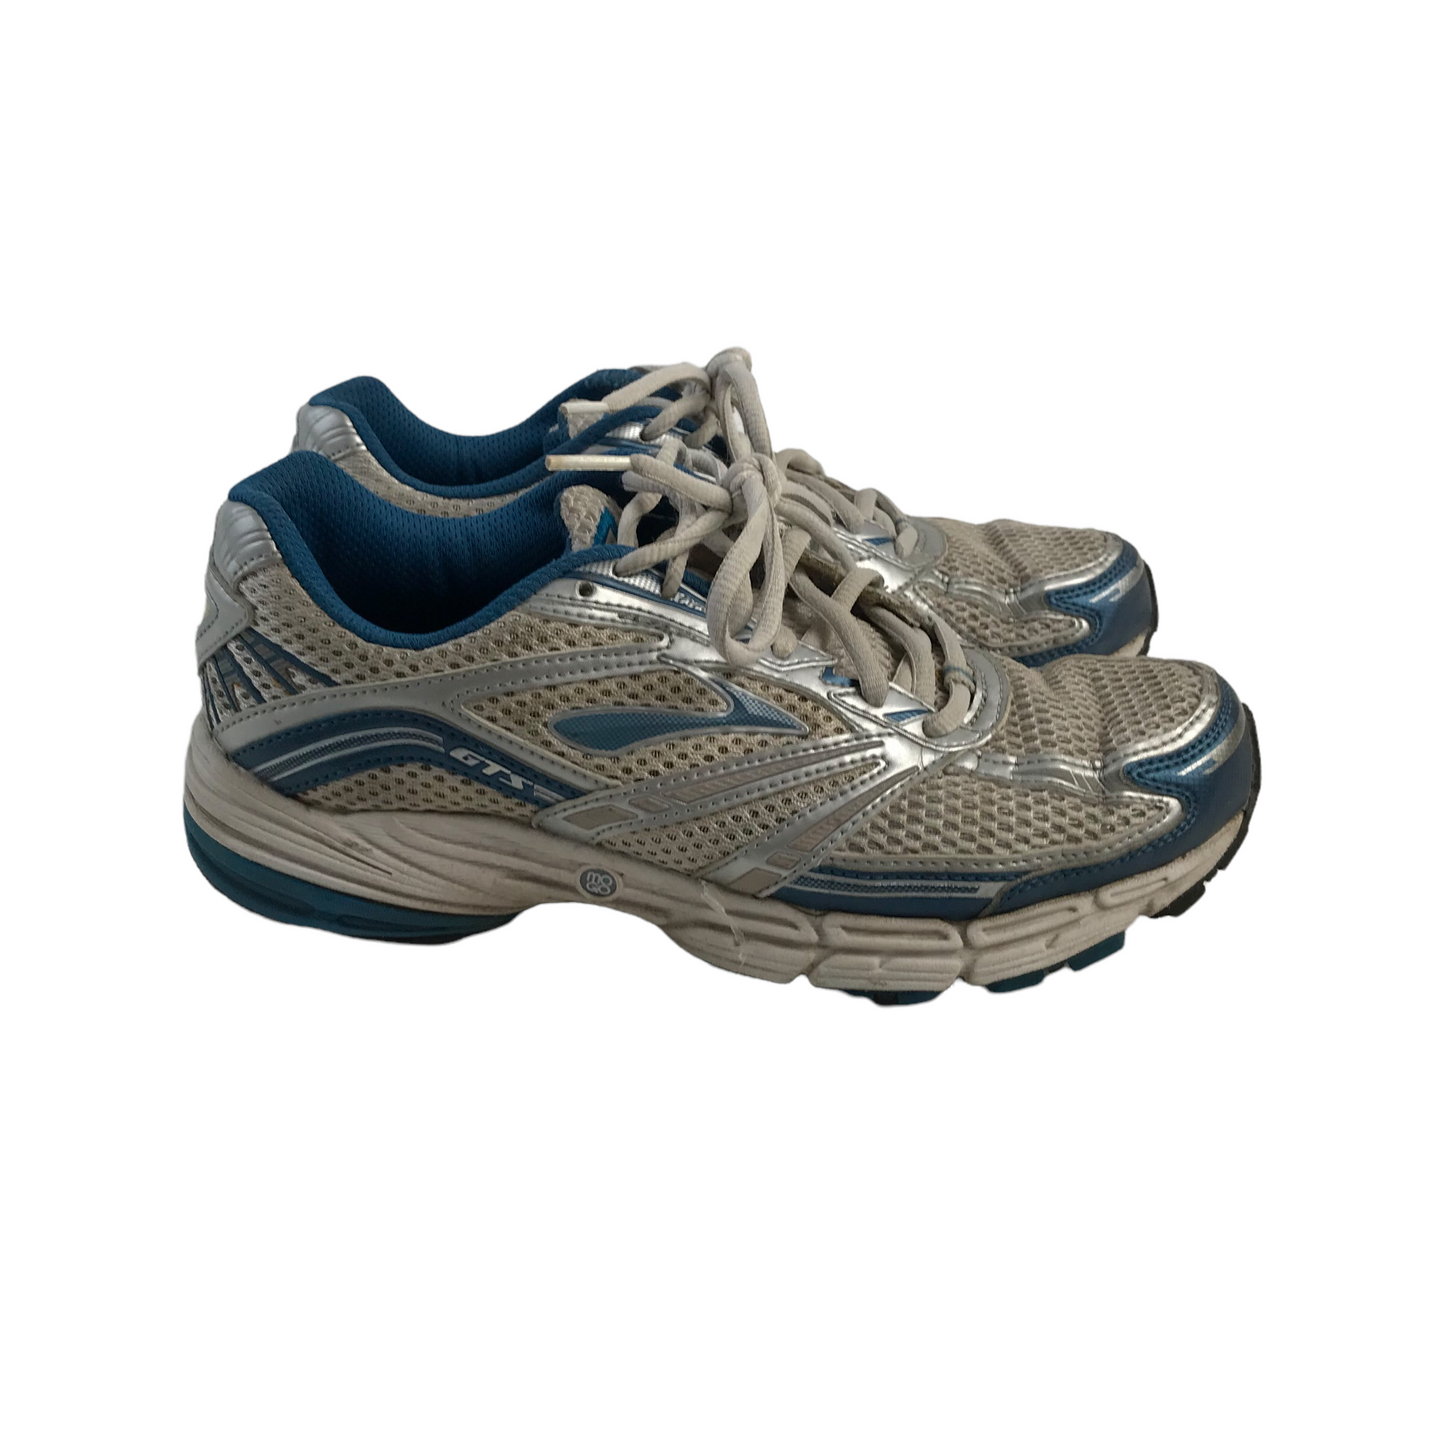 Brooks Adrenaline GTS Silver and Blue Running Trainers Size UK 6.5